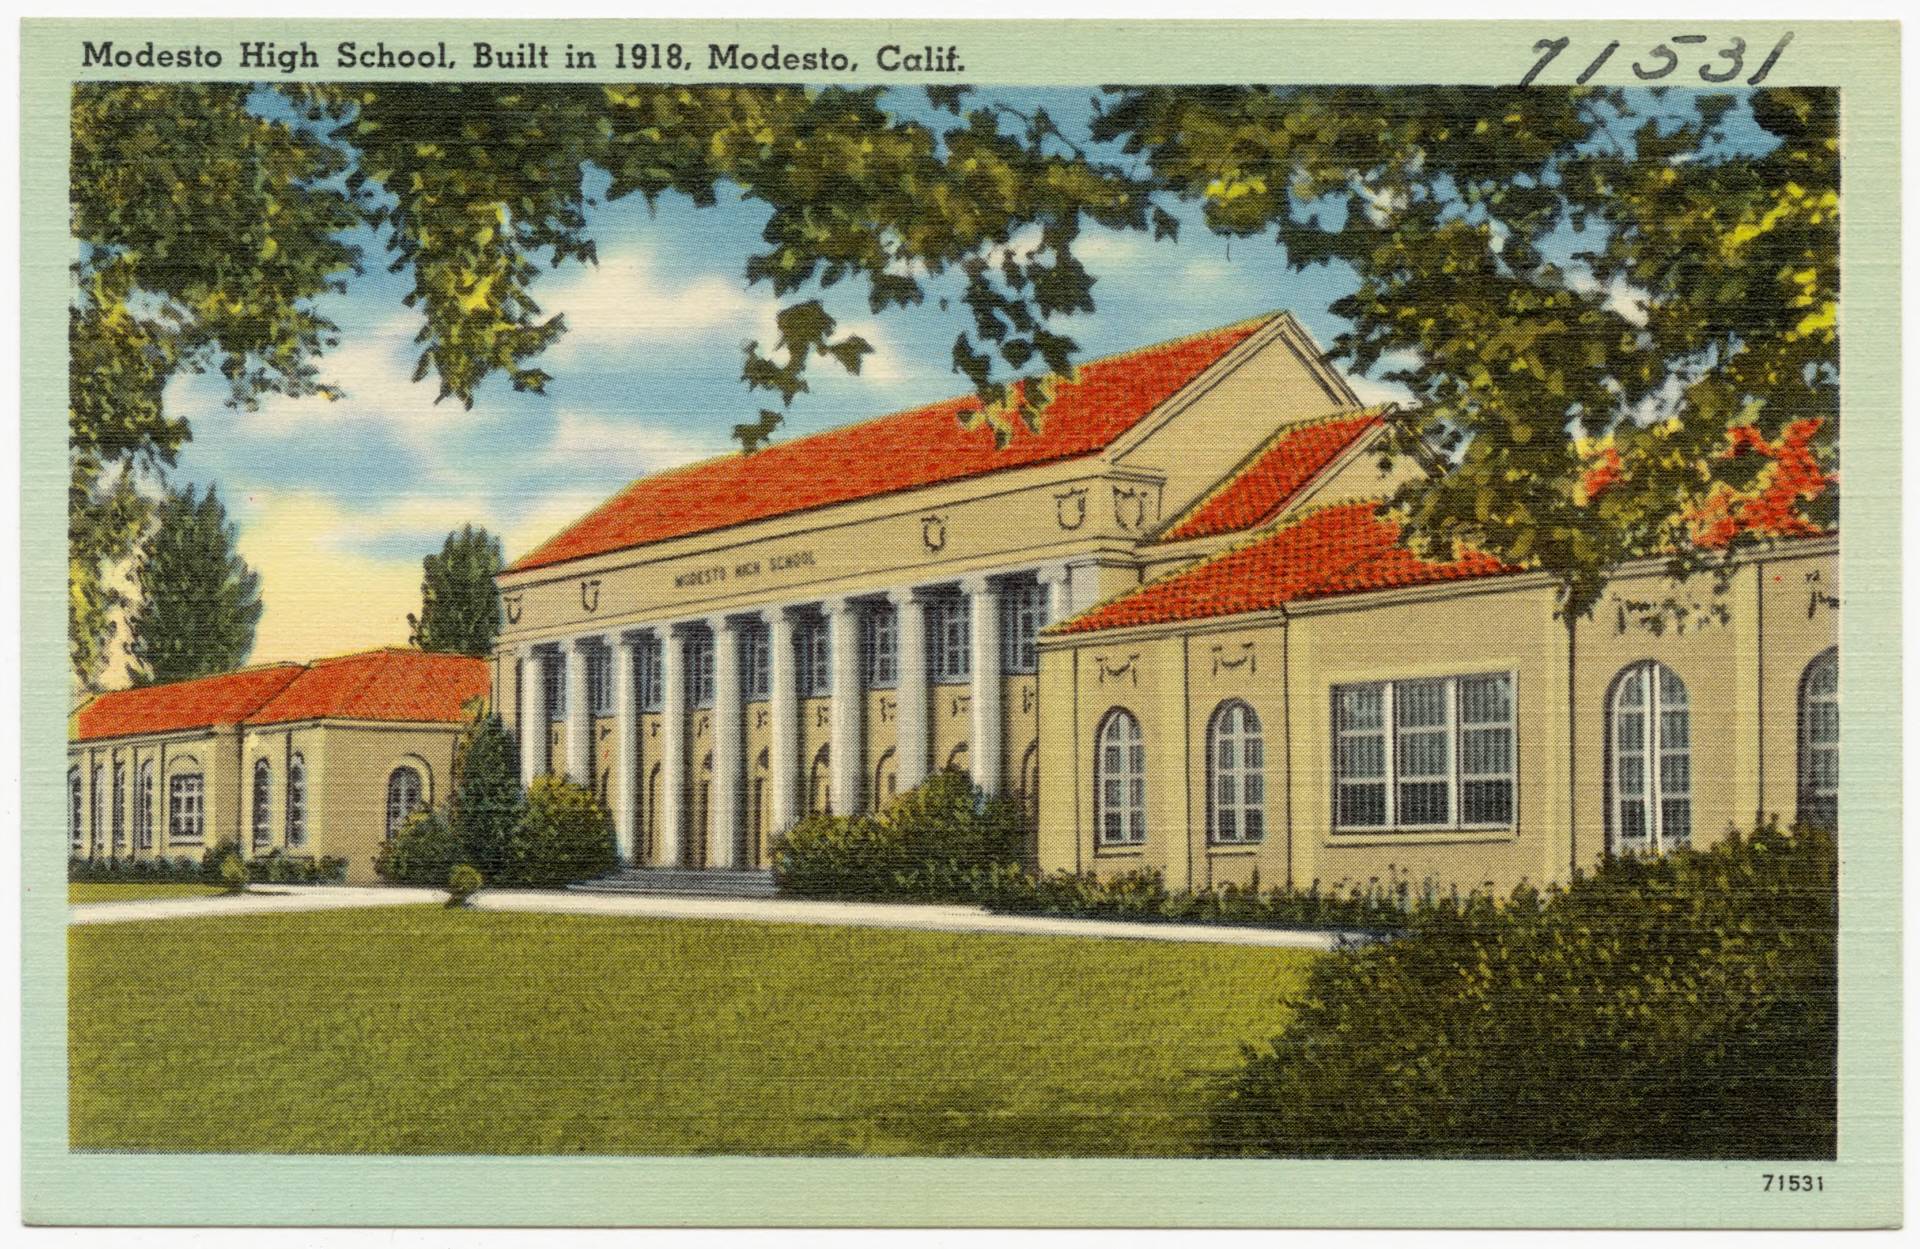 An illustration of the Modesto High School, built in 1918.